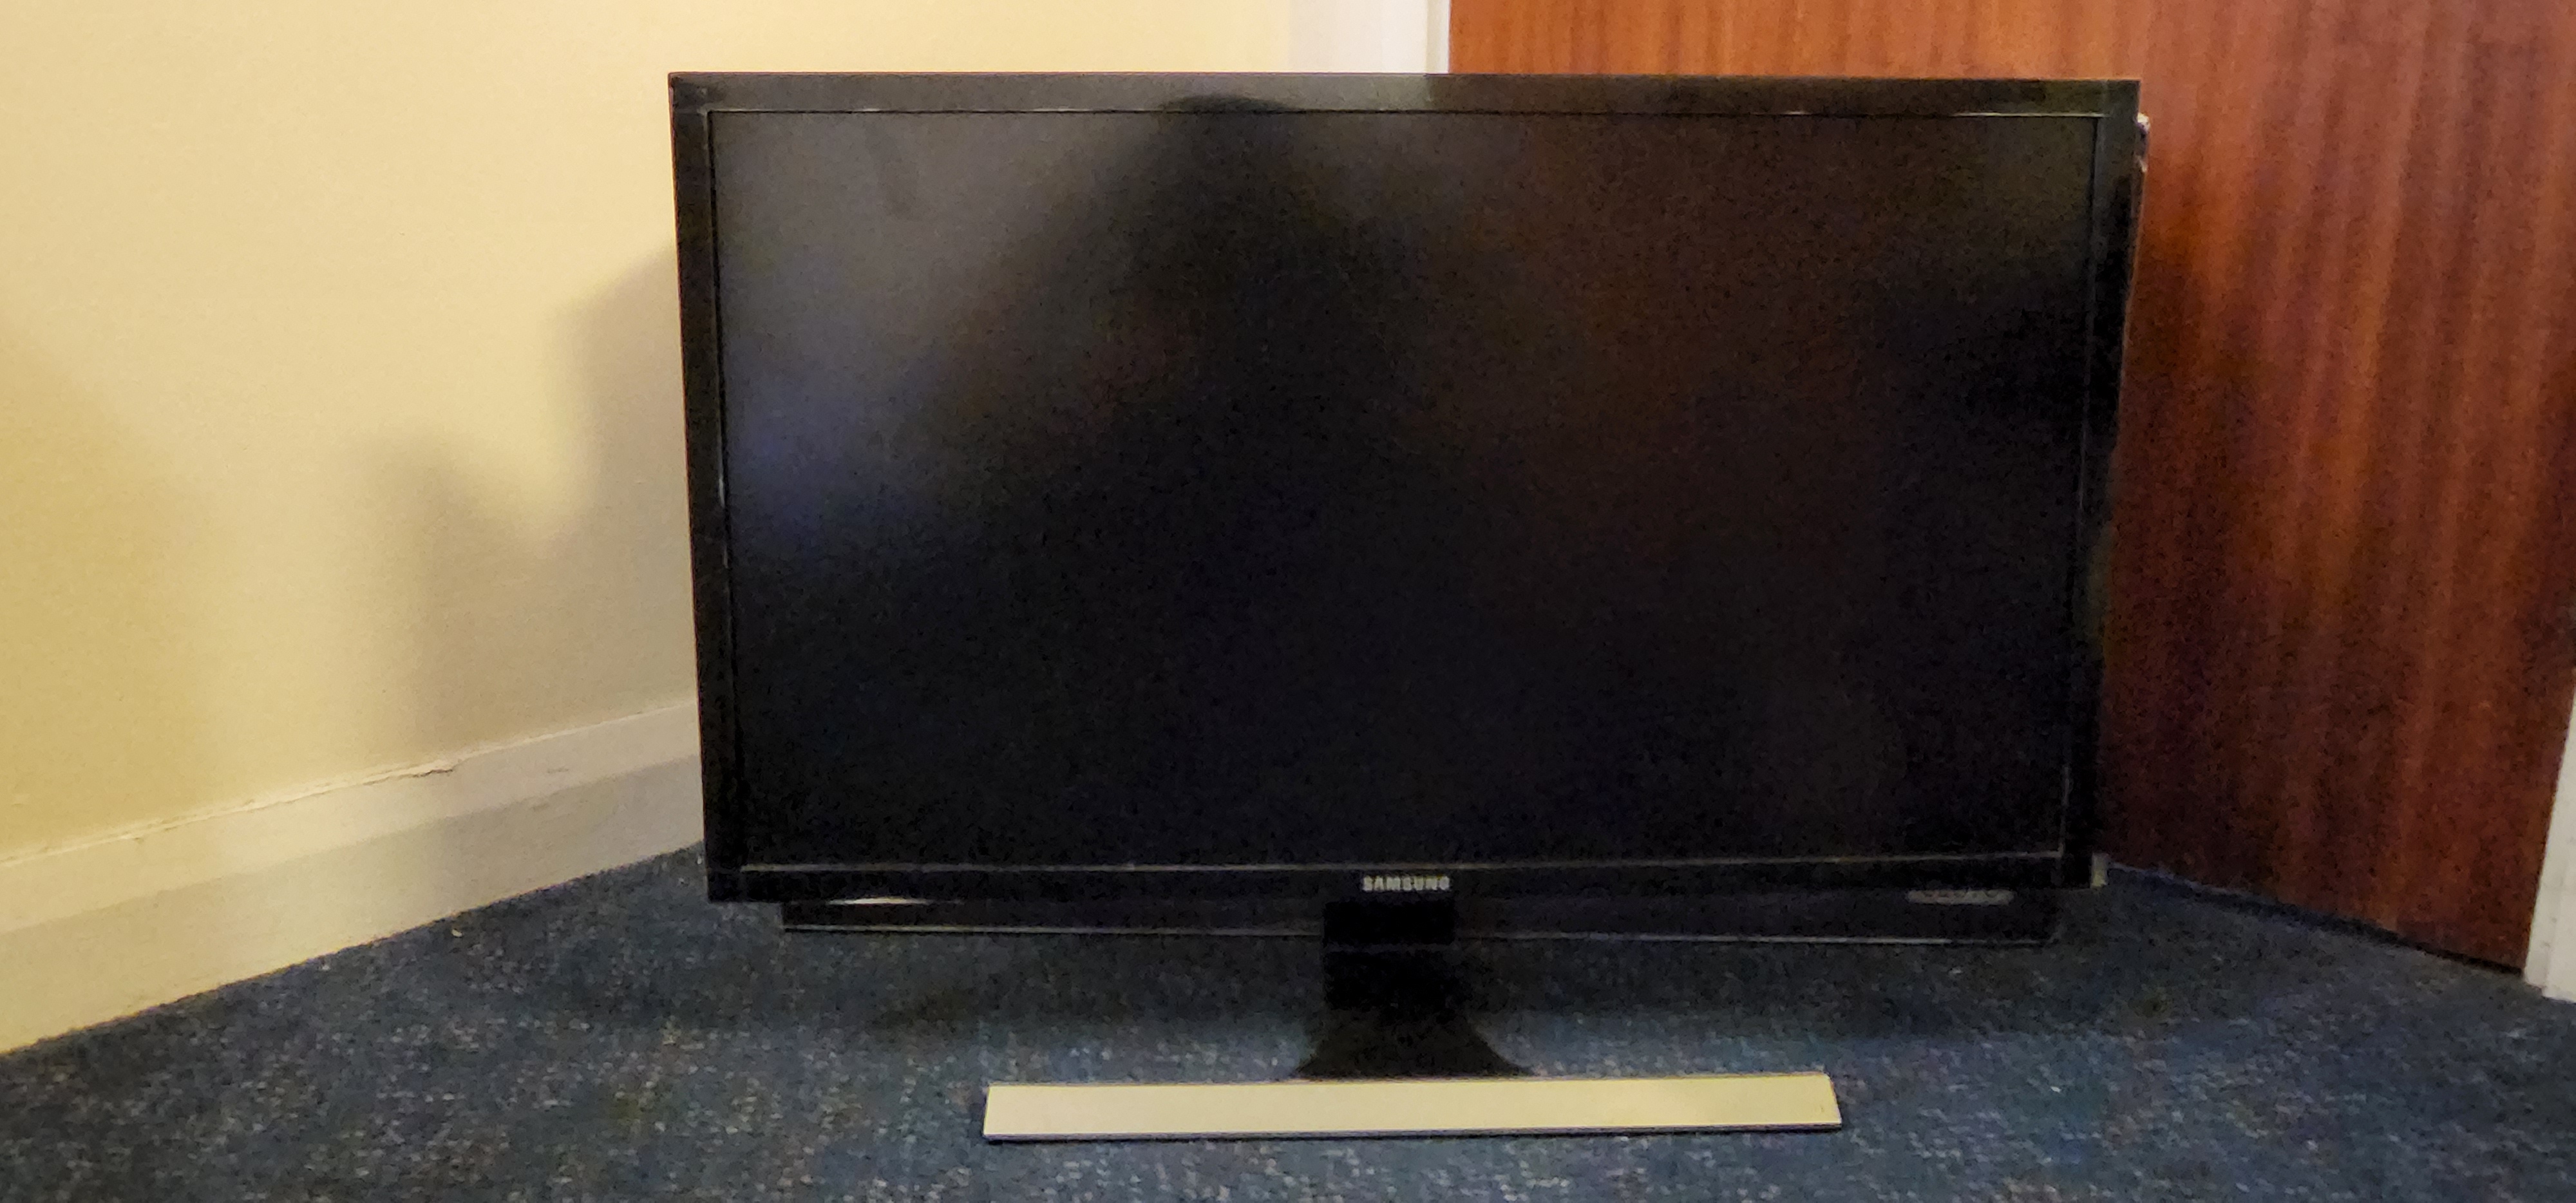 Monitor front-view